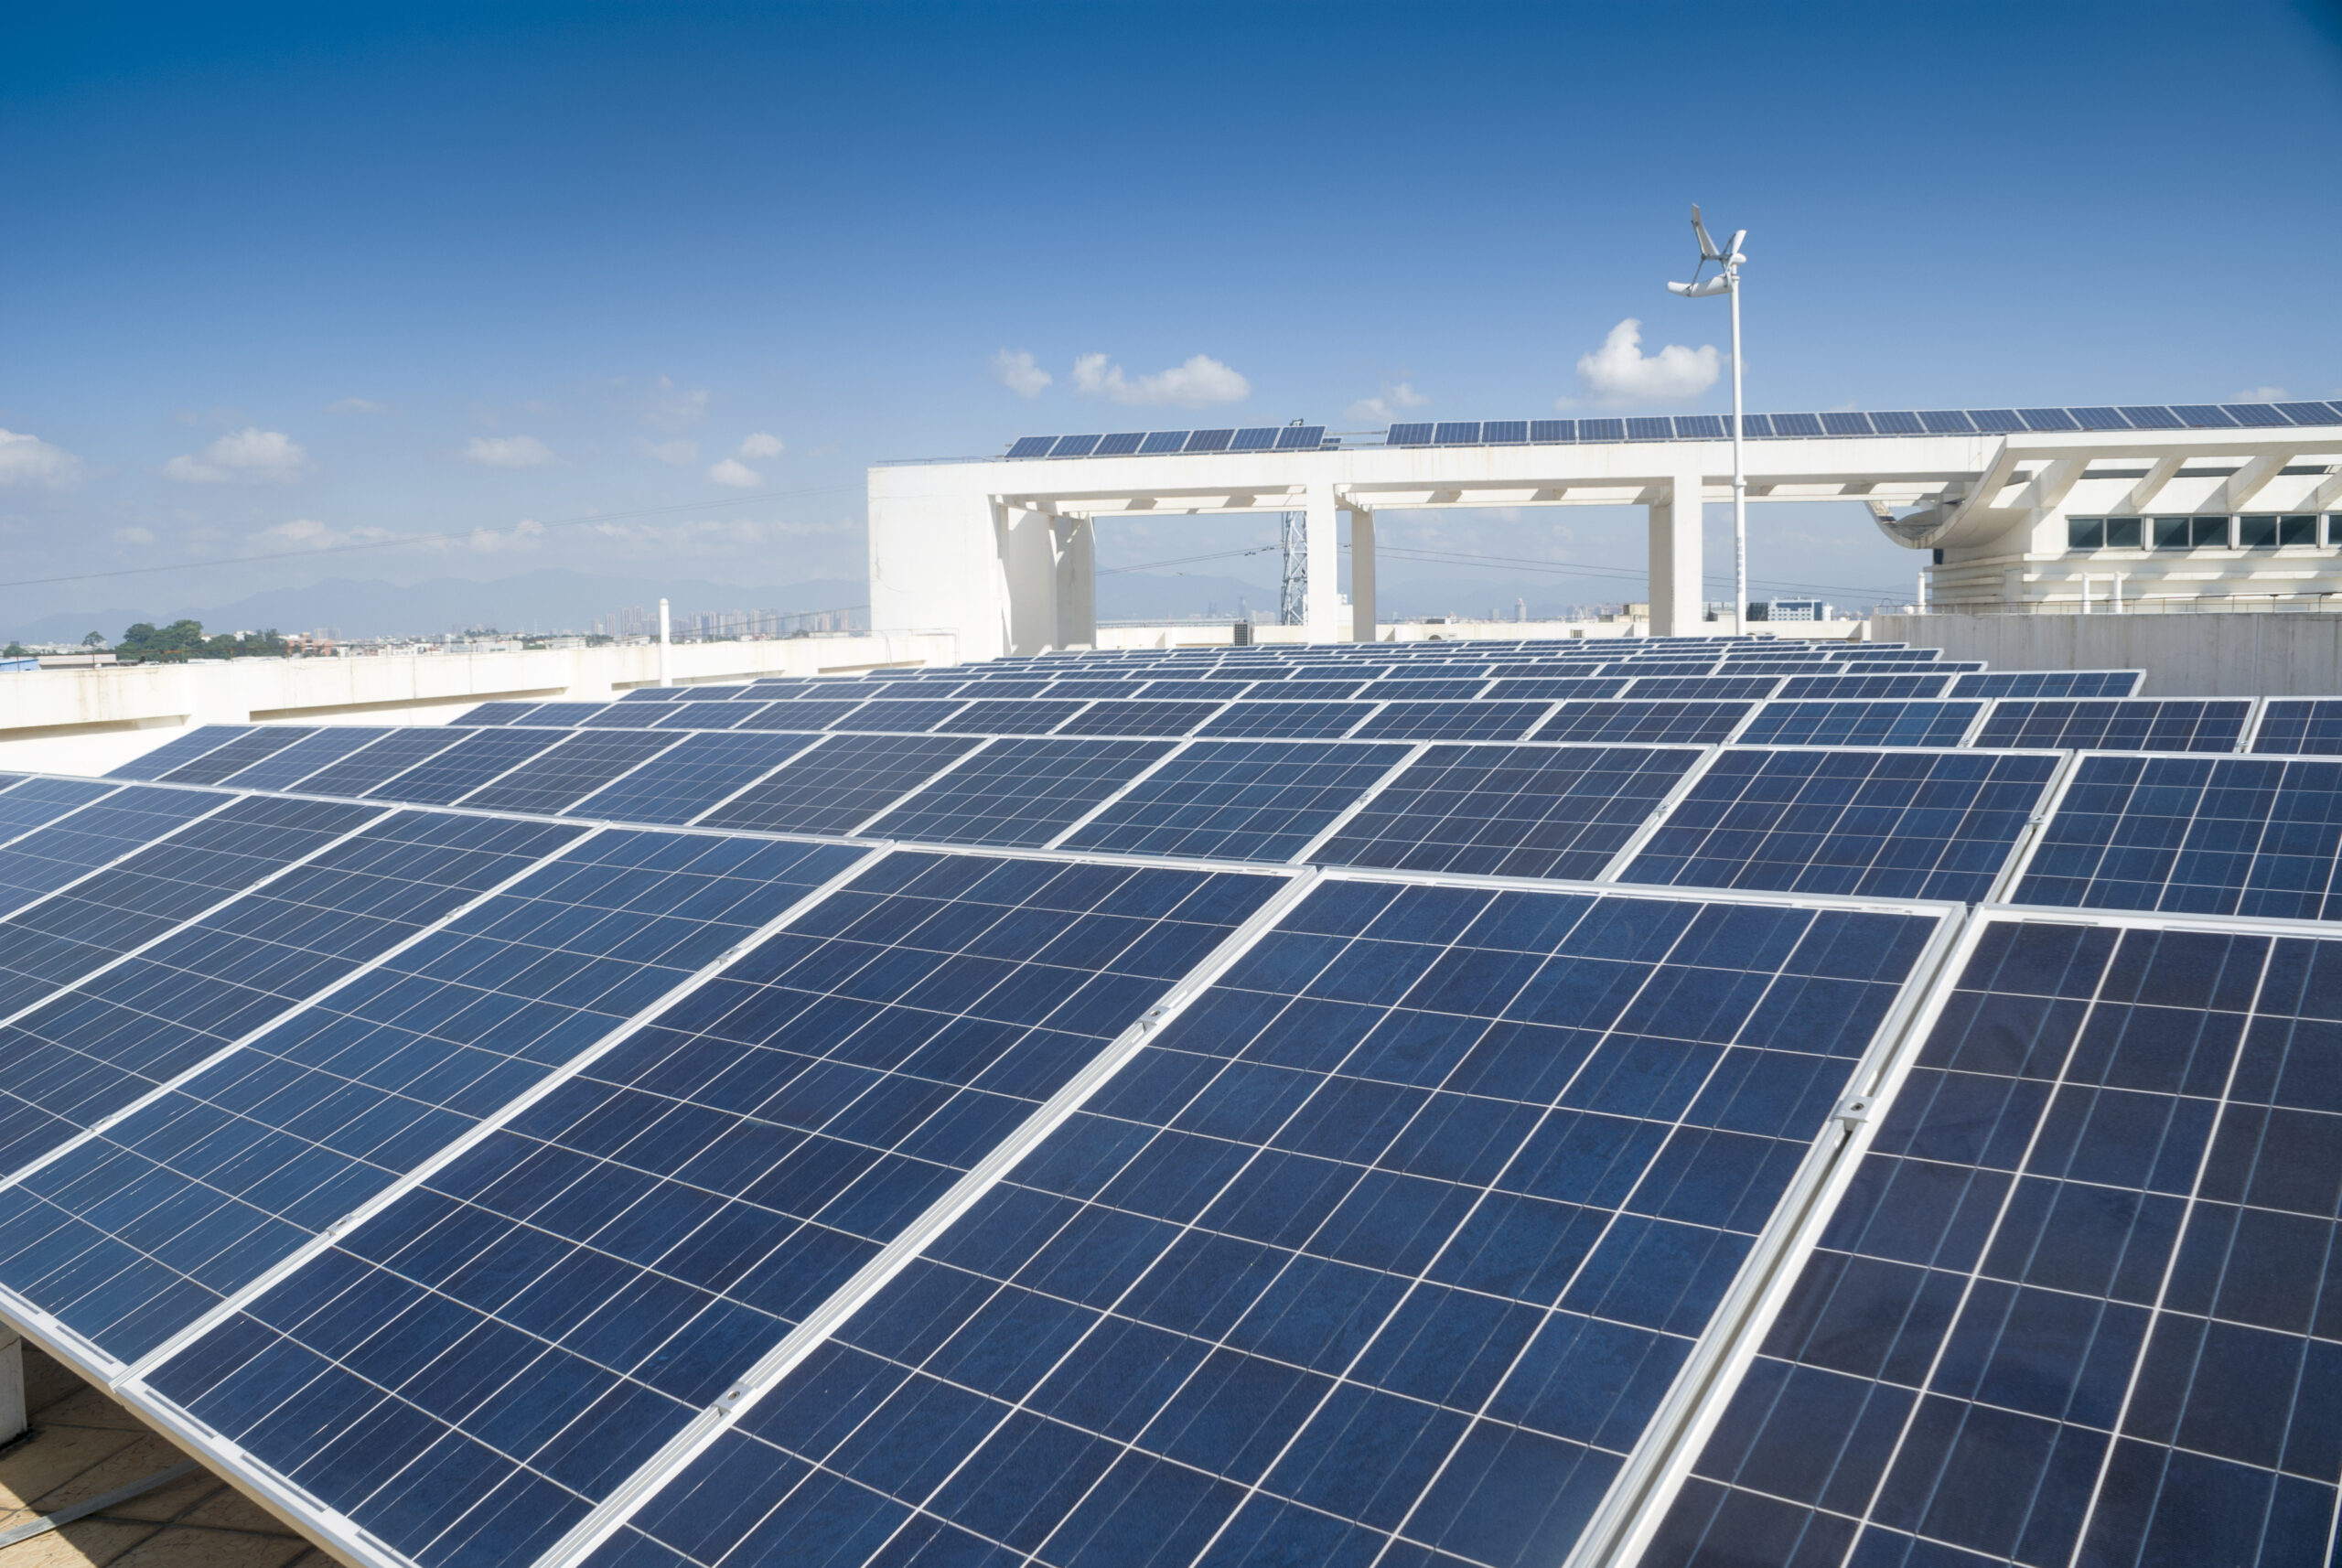 Distributed Generation in the shape of rooftop solar PV